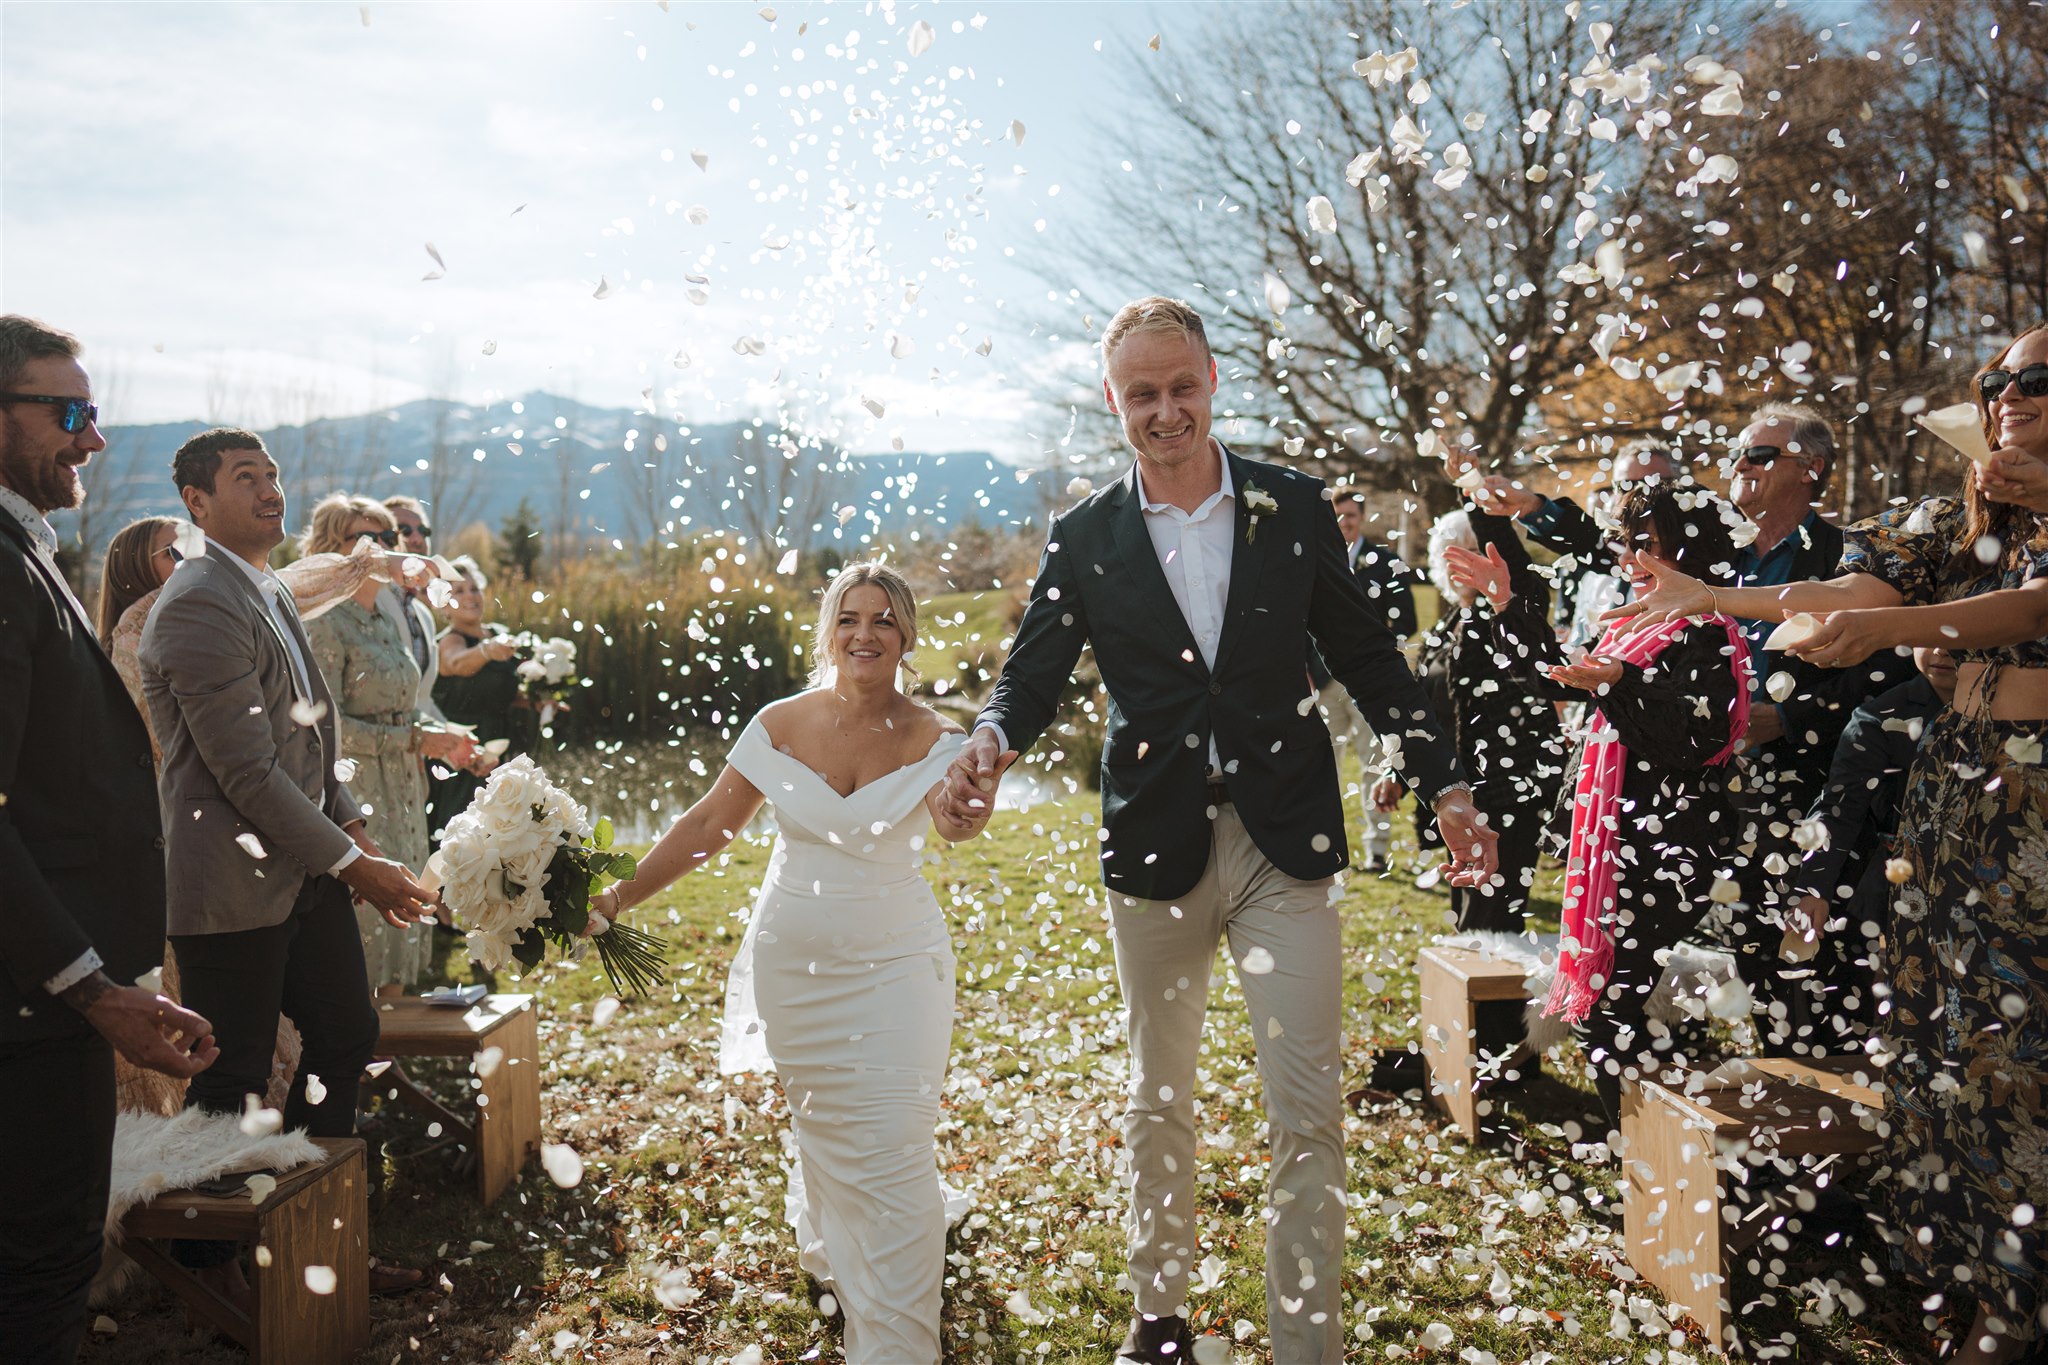 just married couple exit their ceremony with flower petal confetti from guests in Queenstown, New Zealand